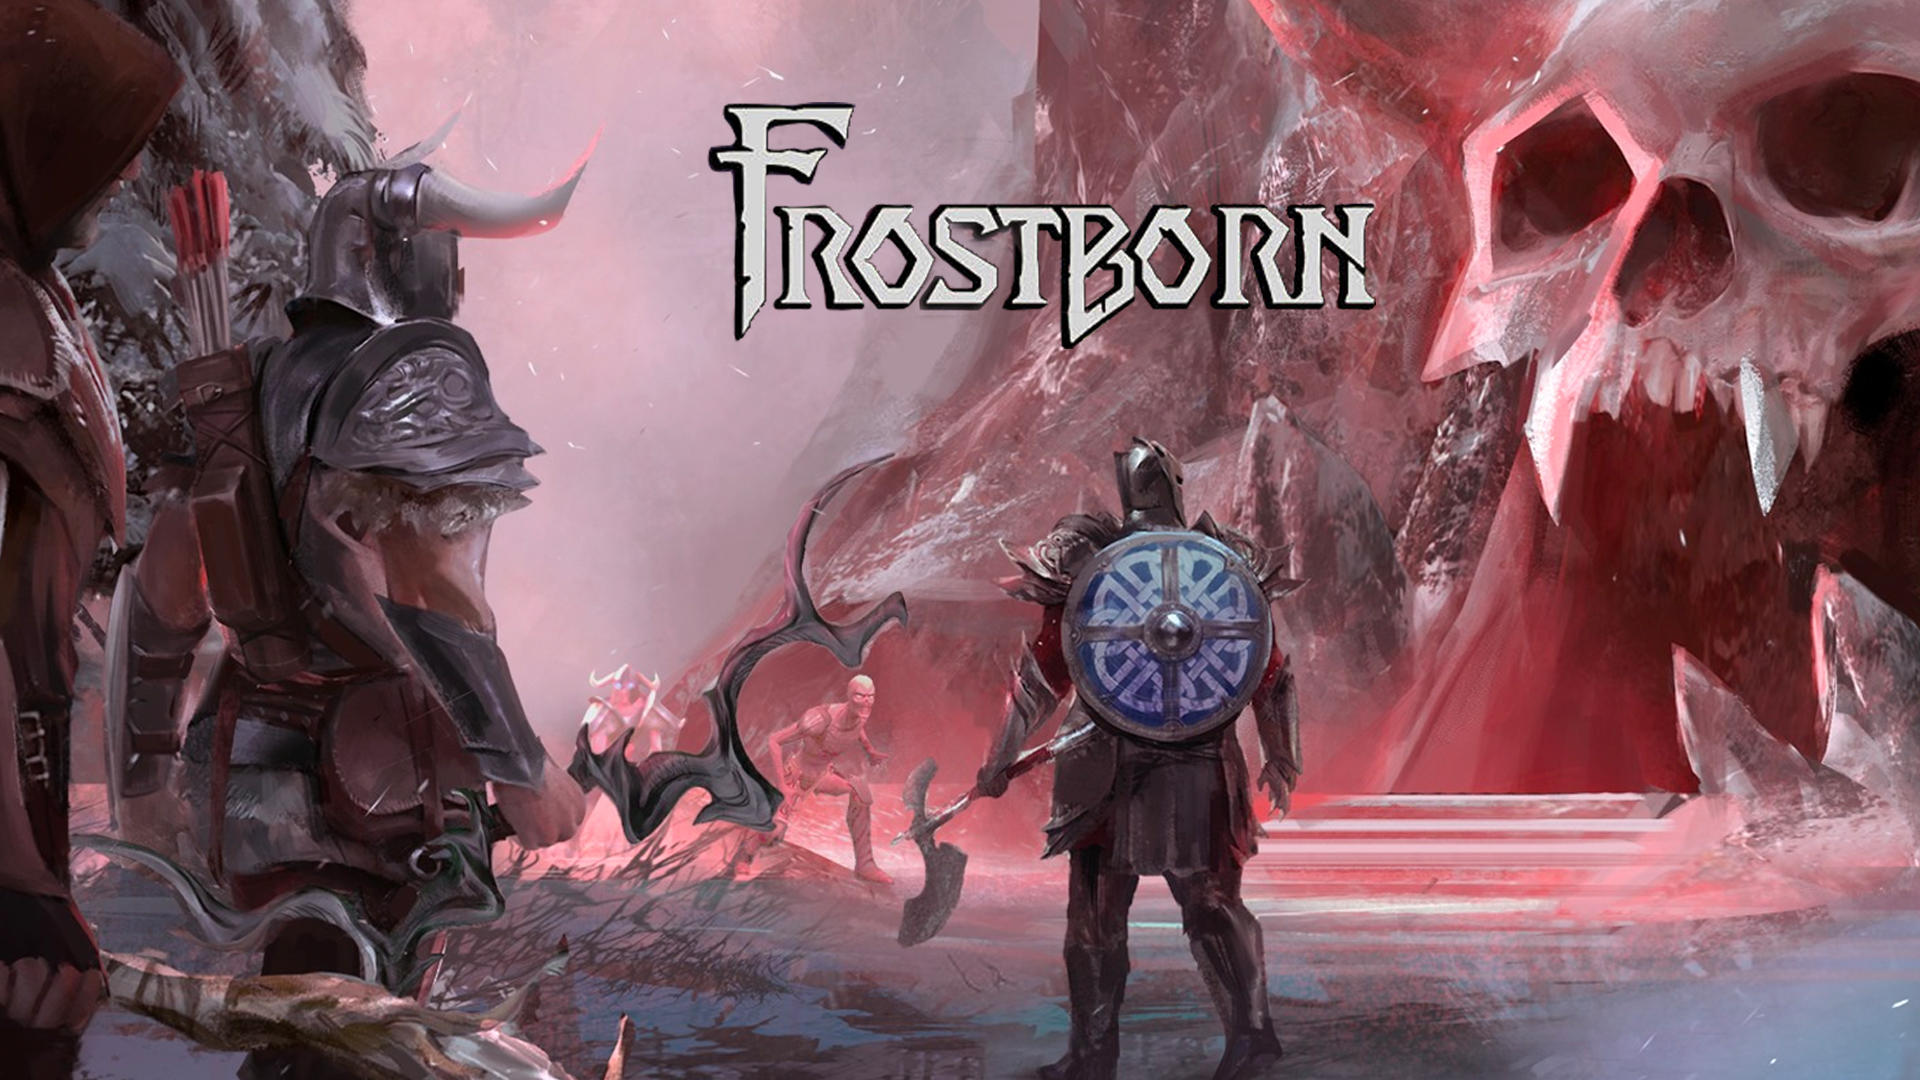 Banner of Frostborn: Action RPG 